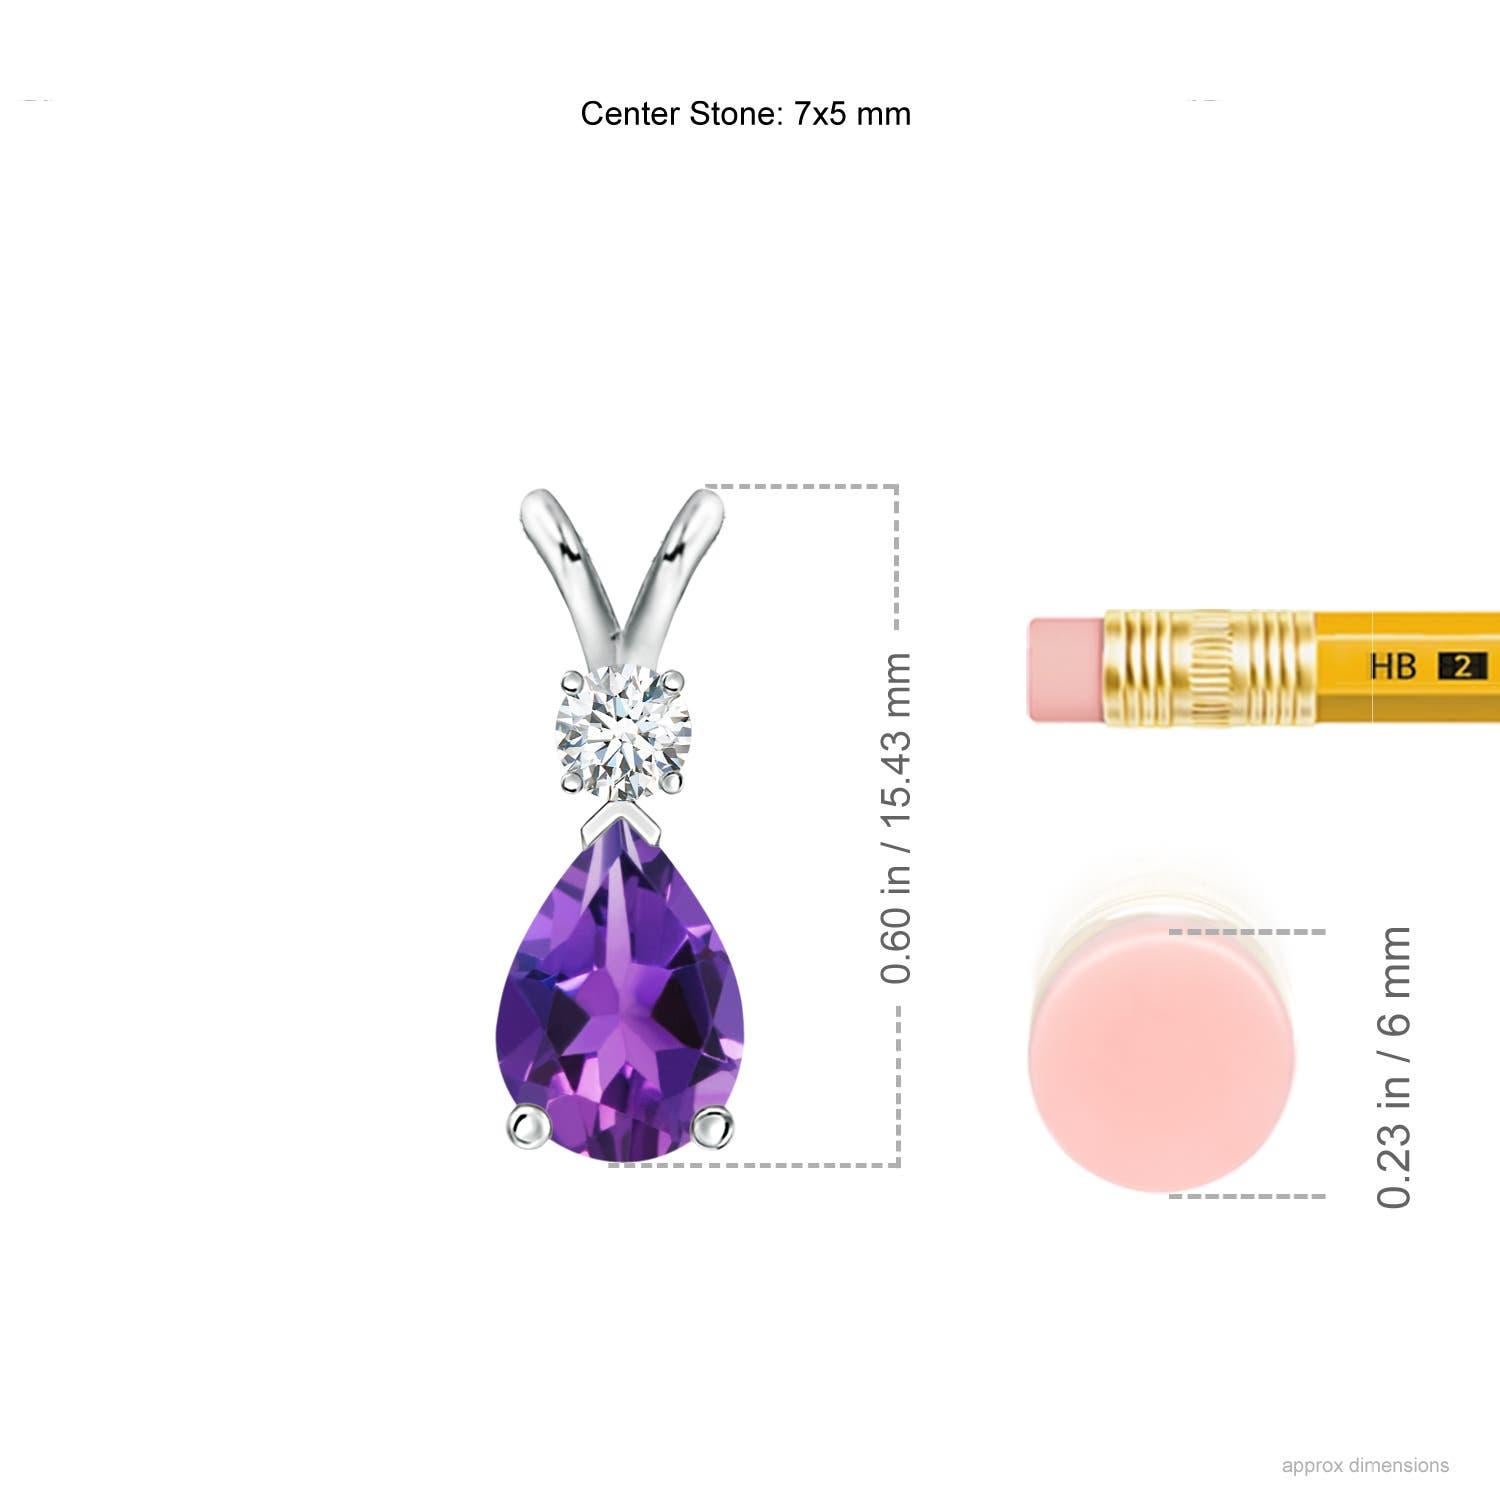 A pear-shaped deep purple amethyst is secured in a prong setting and embellished with a diamond accent on the top. Simple yet stunning, this teardrop amethyst pendant with V bale is sculpted in platinum.